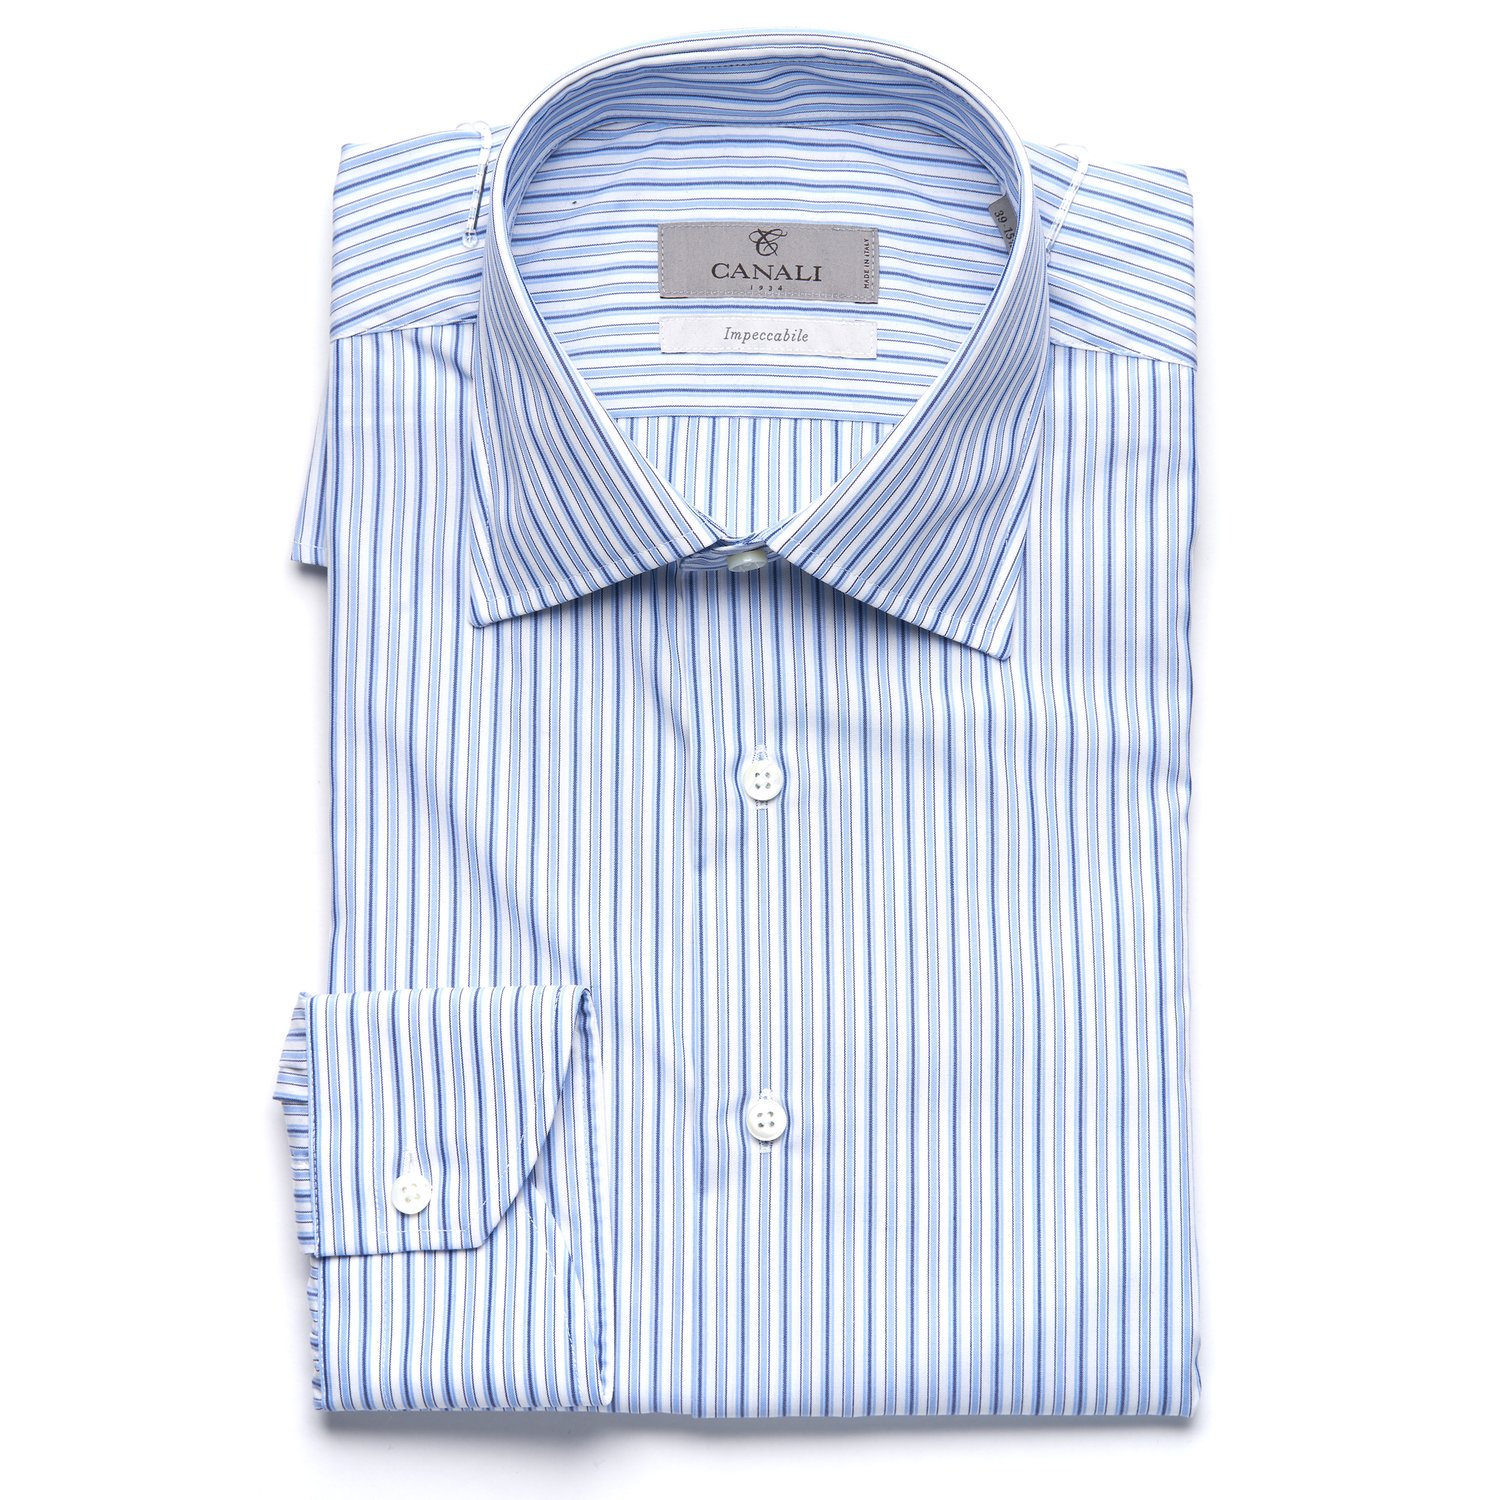 Canali Impeccabile Cotton Modern Fit Dress Shirt in White with Blue Stripes  — Uomo San Francisco